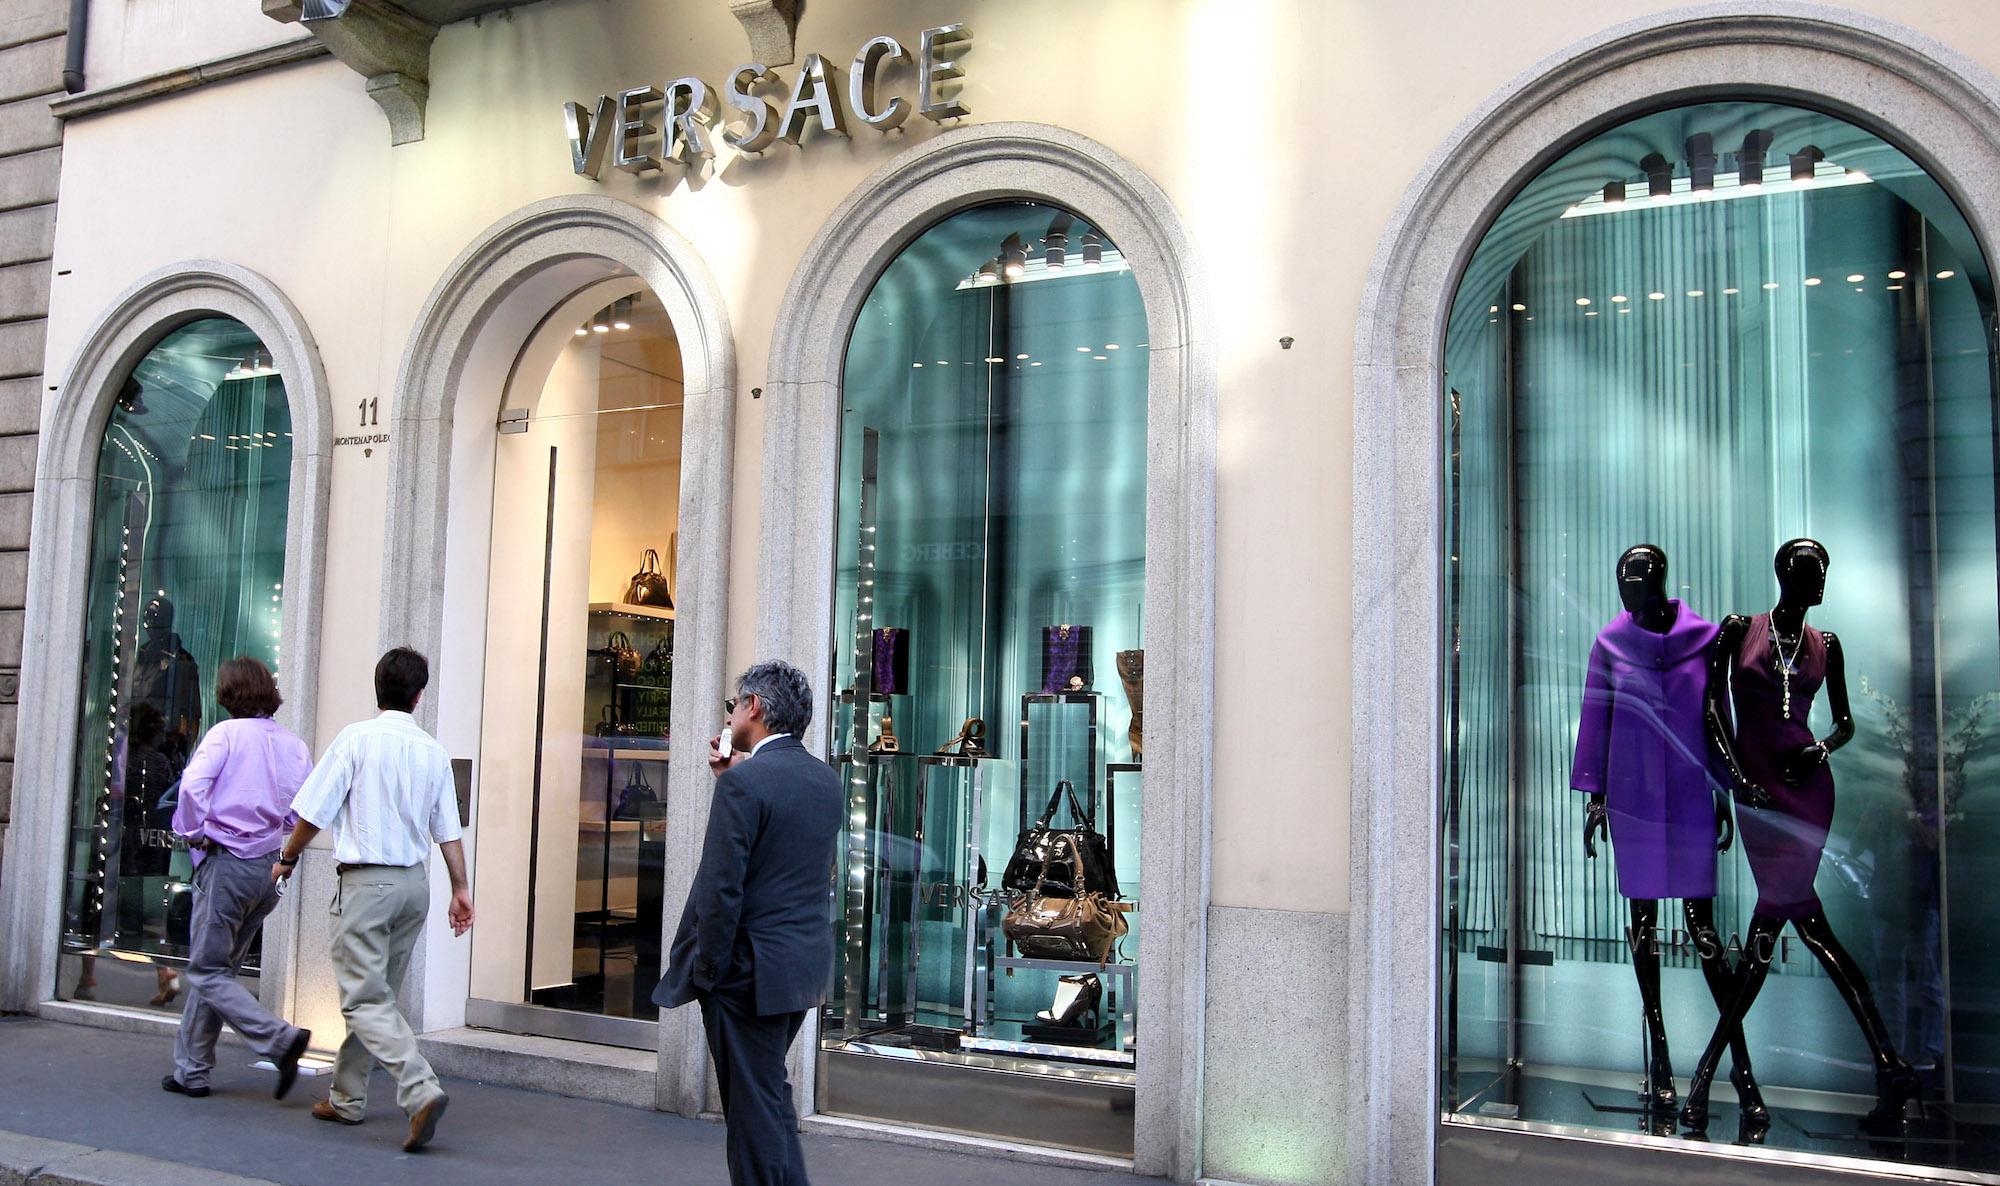 WhatsApp users could soon buy Prada, Versace and other luxury goods through  the app | The Independent | The Independent